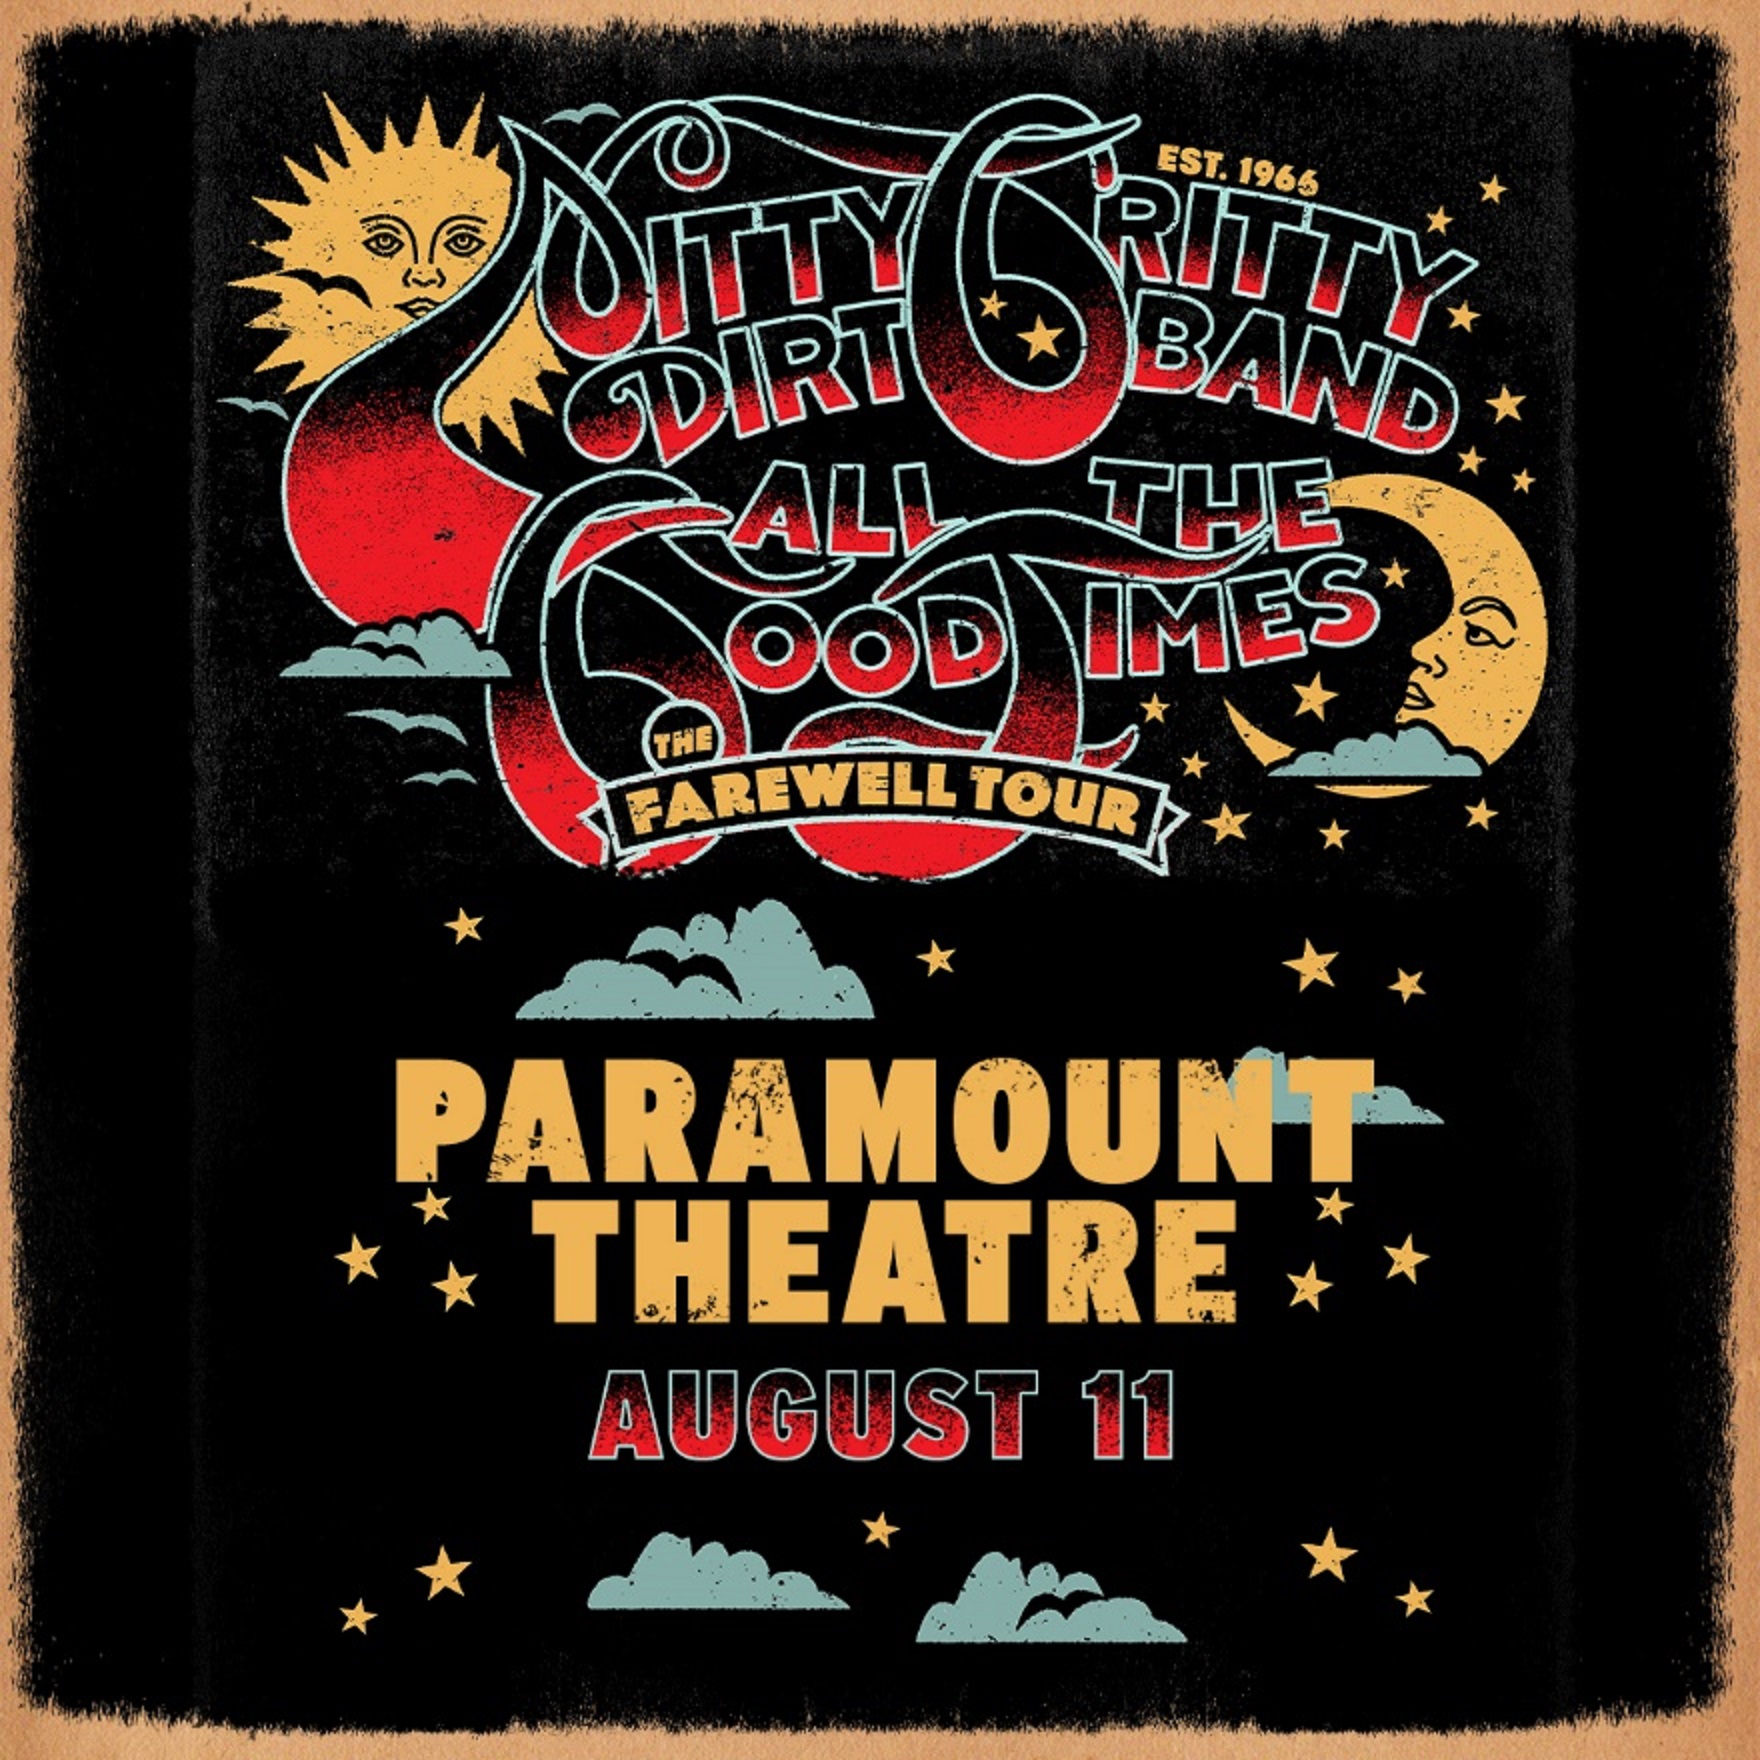 NITTY GRITTY DIRT BAND ANNOUNCES "ALL THE GOOD TIMES: THE FAREWELL TOUR" AT PARAMOUNT THEATRE